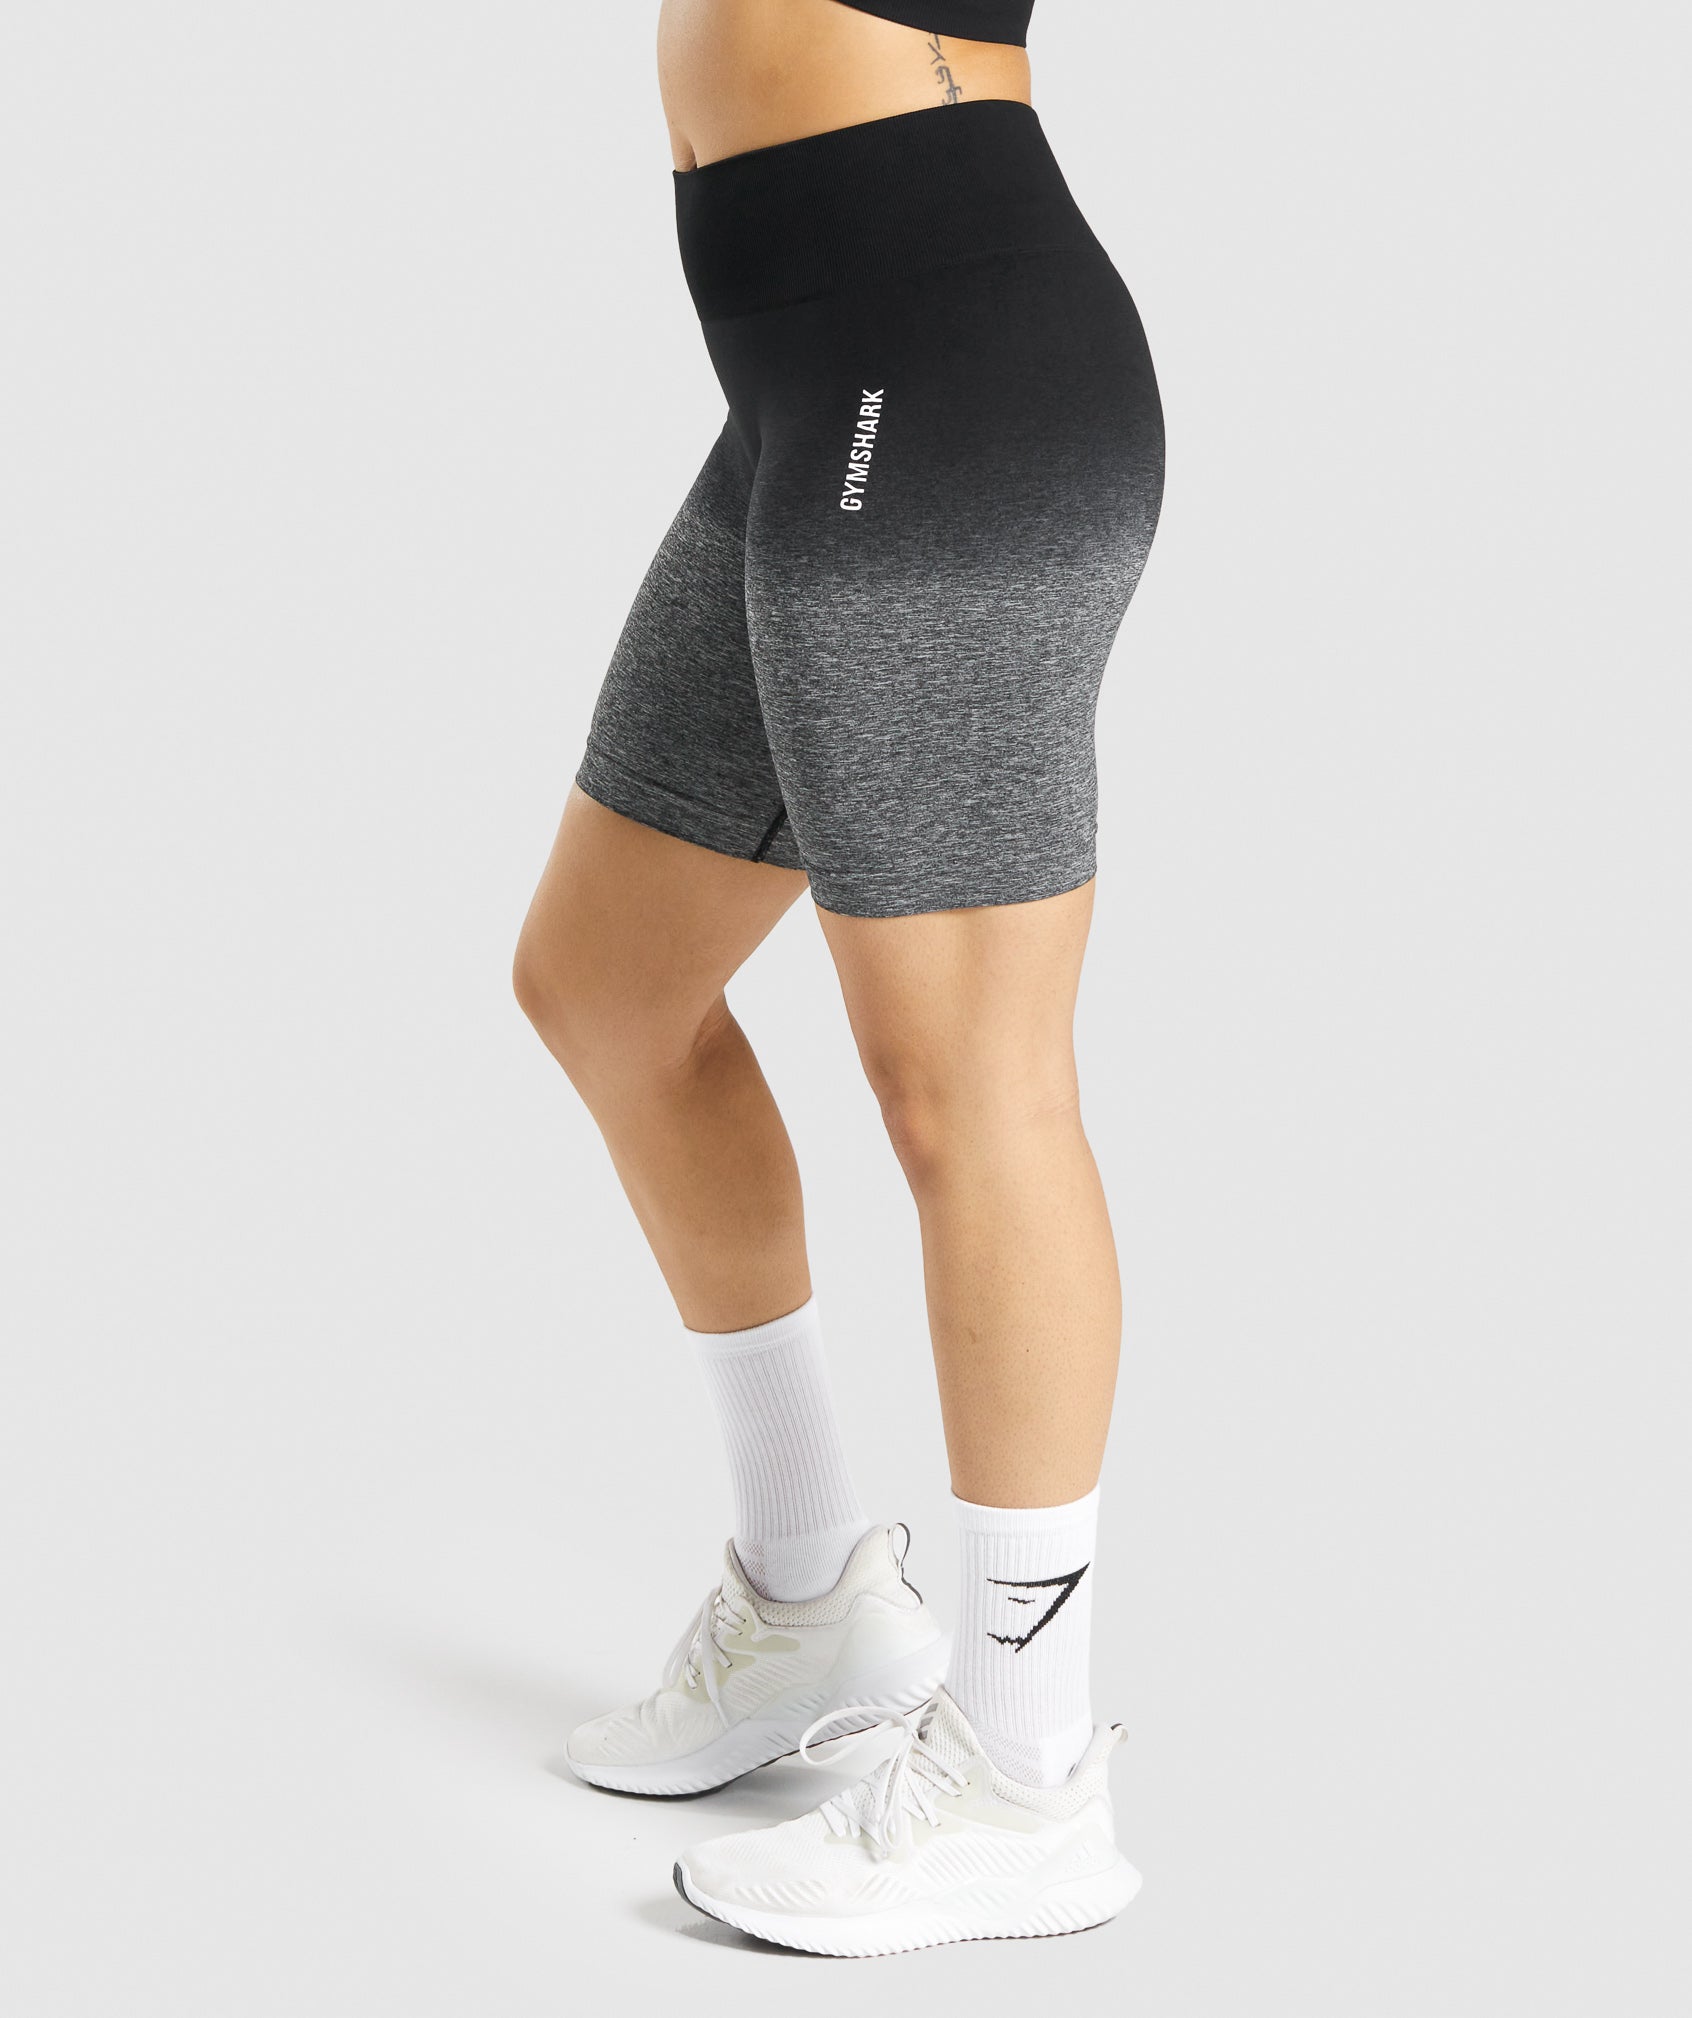 Adapt Ombre Seamless Shorts in Black/Black Marl - view 3